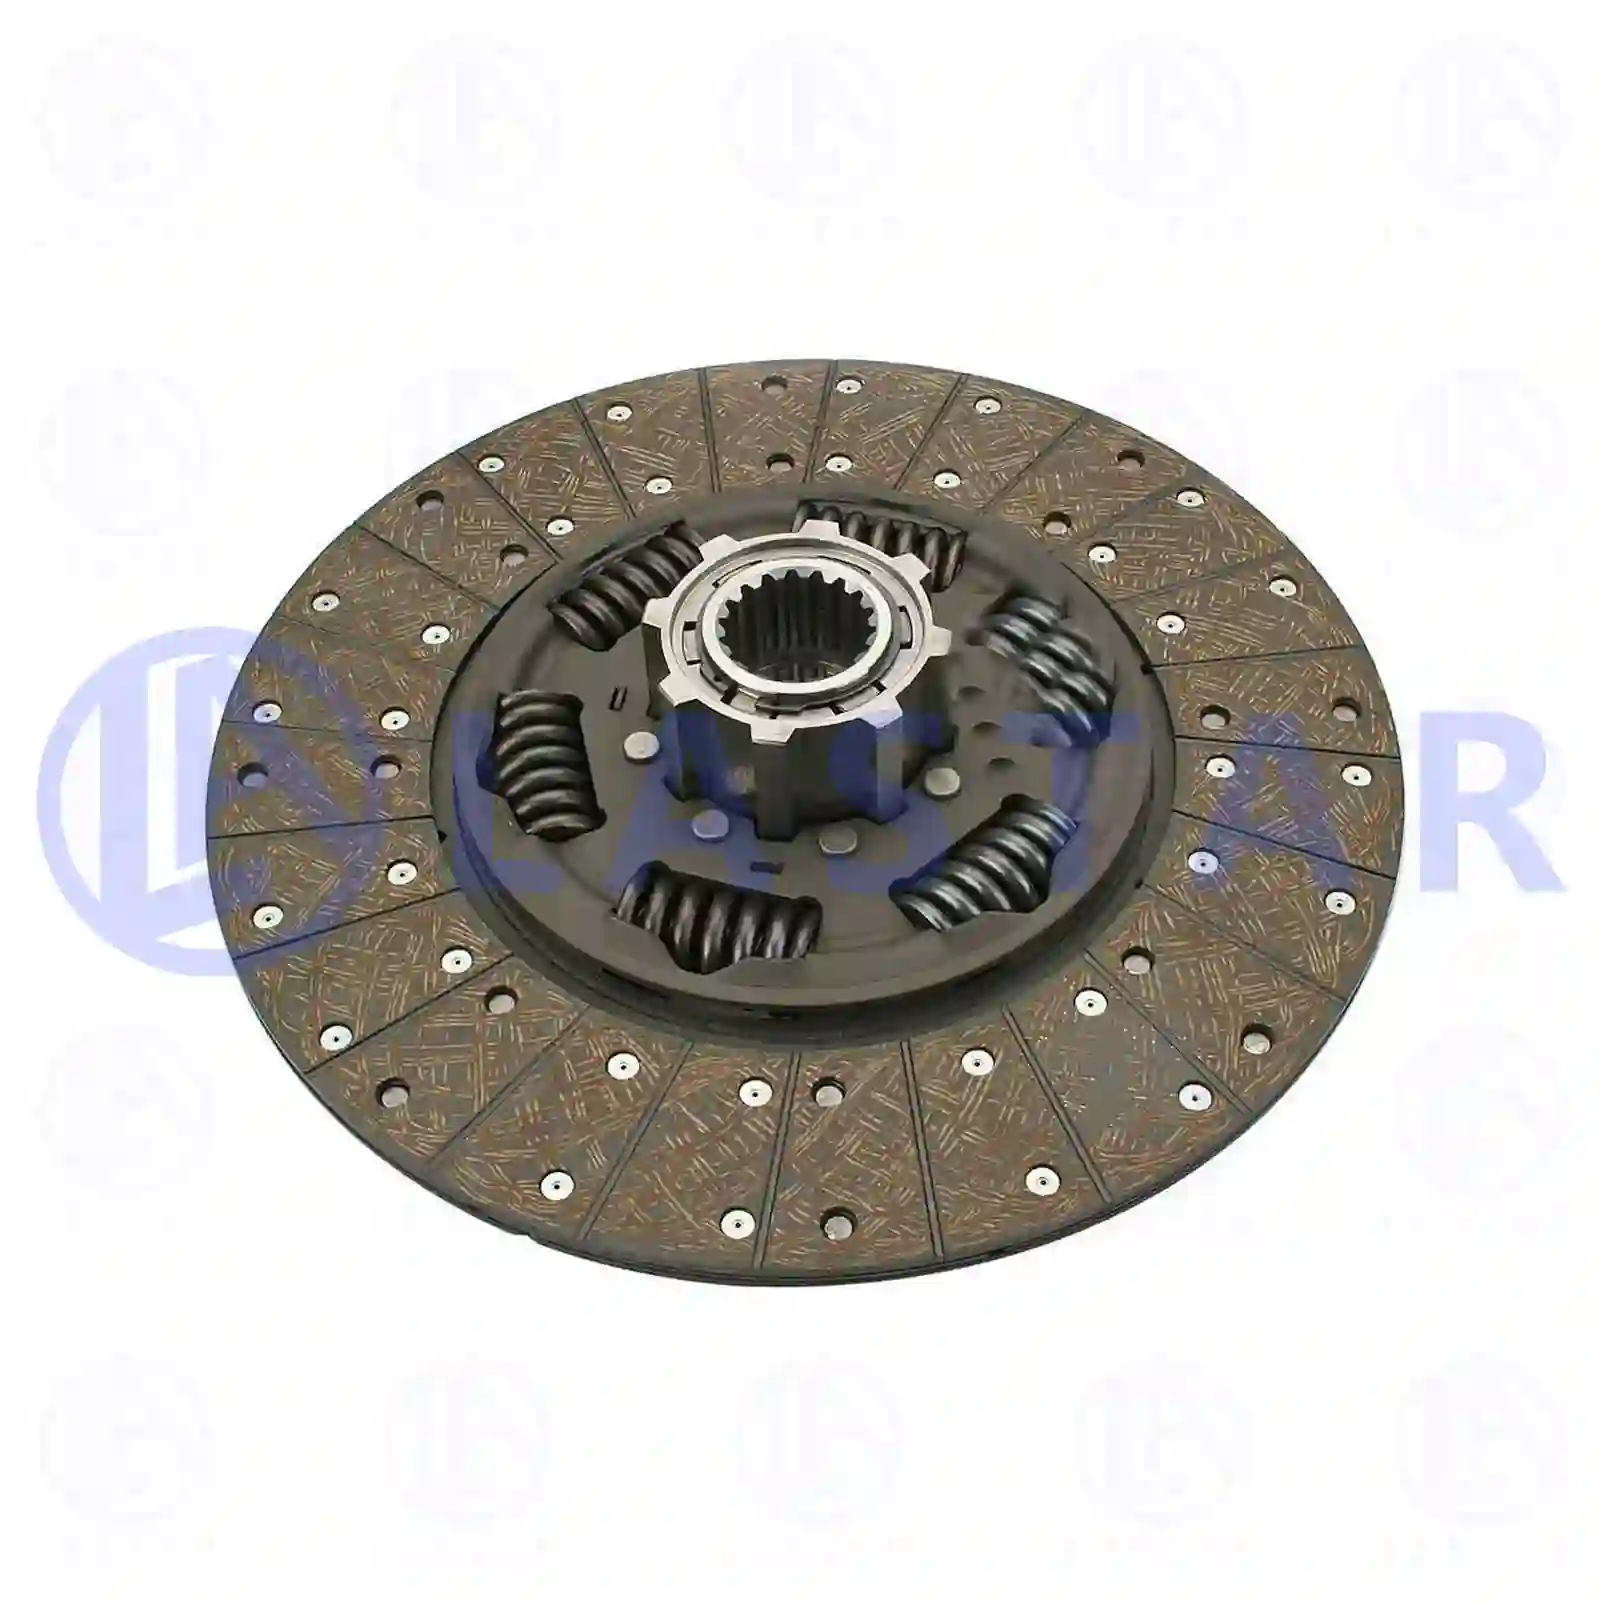 Clutch disc, 77722418, 0152507903, 0152508003, 0152508103, 0162509403, 0162509503, 0162509603, 0172500303, 0172500903, 0172501103, 0172505903, 0172506003, 0172506103, 0182501103, 0182501303, 0182506003, 018250600380, 0192505203, 019250520380, 0192506103, 019250610380, 0202503803, 0202509403, 020250940380, 0212502003, 0212502103, 0212502203, 021250220380, 0212507603, 0212508403, 0212508503, 0212508703, 0212509703, 0222501503, 0242500603, ZG30297-0008 ||  77722418 Lastar Spare Part | Truck Spare Parts, Auotomotive Spare Parts Clutch disc, 77722418, 0152507903, 0152508003, 0152508103, 0162509403, 0162509503, 0162509603, 0172500303, 0172500903, 0172501103, 0172505903, 0172506003, 0172506103, 0182501103, 0182501303, 0182506003, 018250600380, 0192505203, 019250520380, 0192506103, 019250610380, 0202503803, 0202509403, 020250940380, 0212502003, 0212502103, 0212502203, 021250220380, 0212507603, 0212508403, 0212508503, 0212508703, 0212509703, 0222501503, 0242500603, ZG30297-0008 ||  77722418 Lastar Spare Part | Truck Spare Parts, Auotomotive Spare Parts